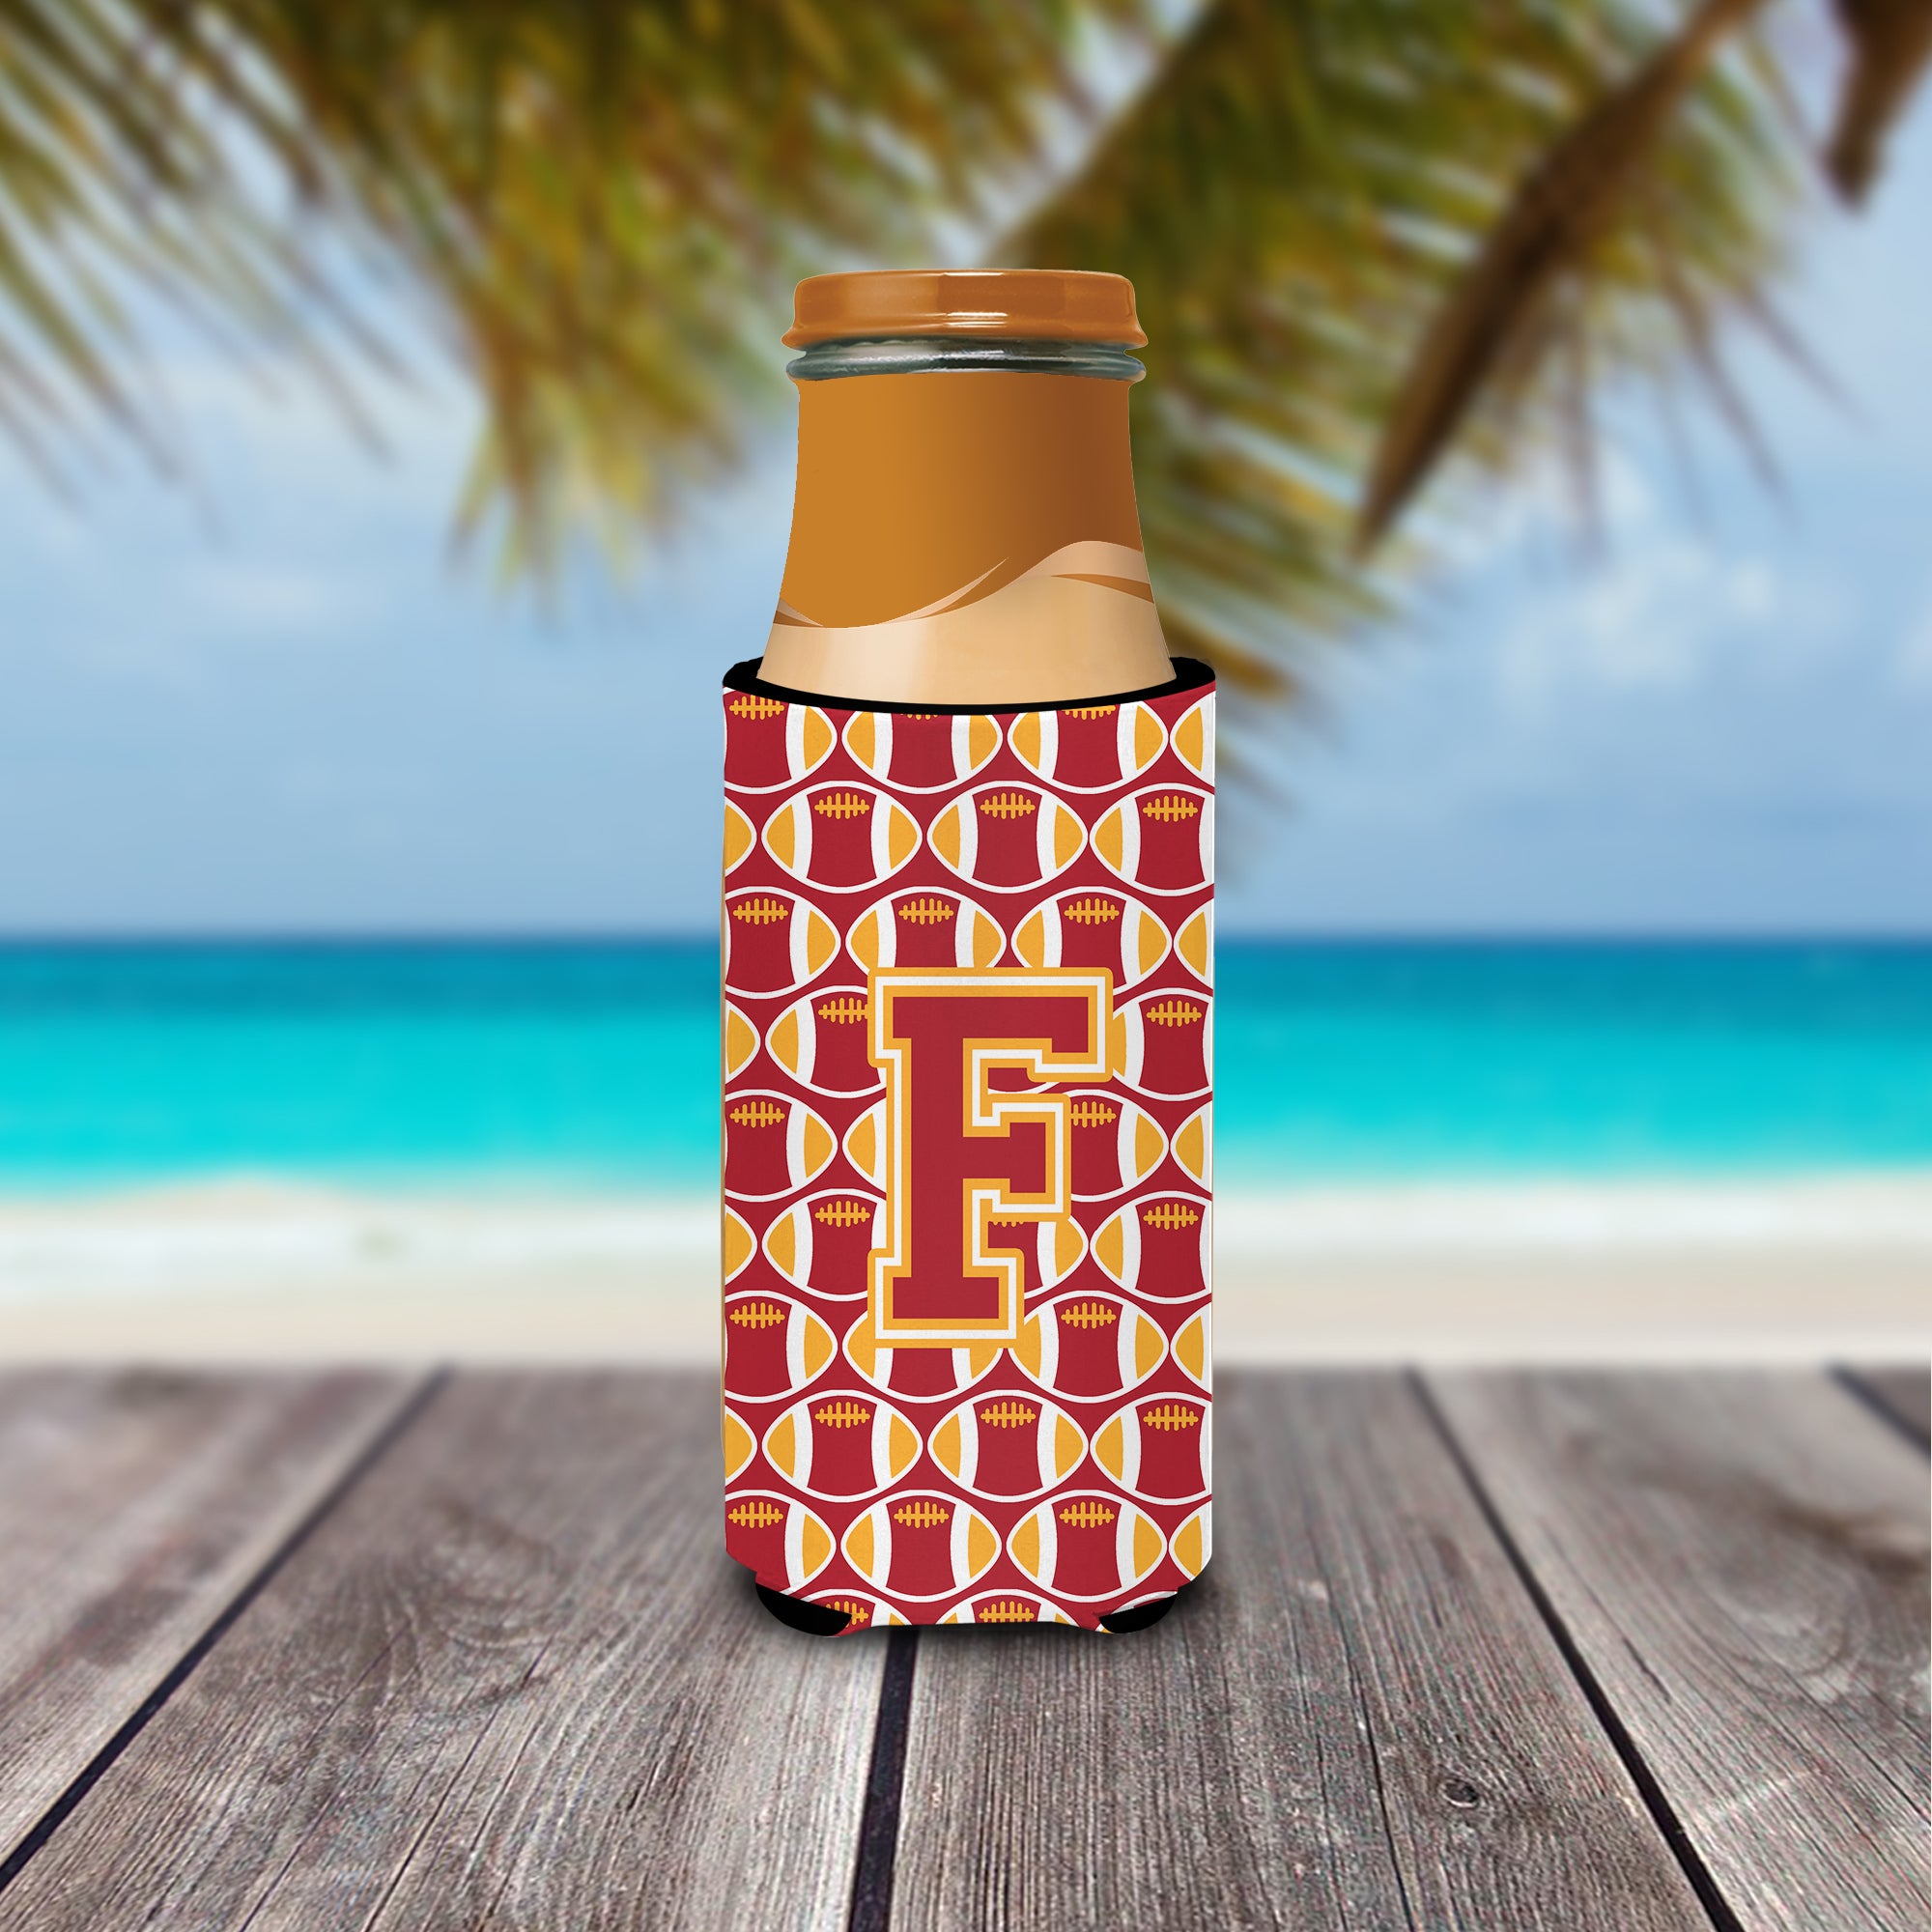 Letter F Football Cardinal and Gold Ultra Beverage Insulators for slim cans CJ1070-FMUK